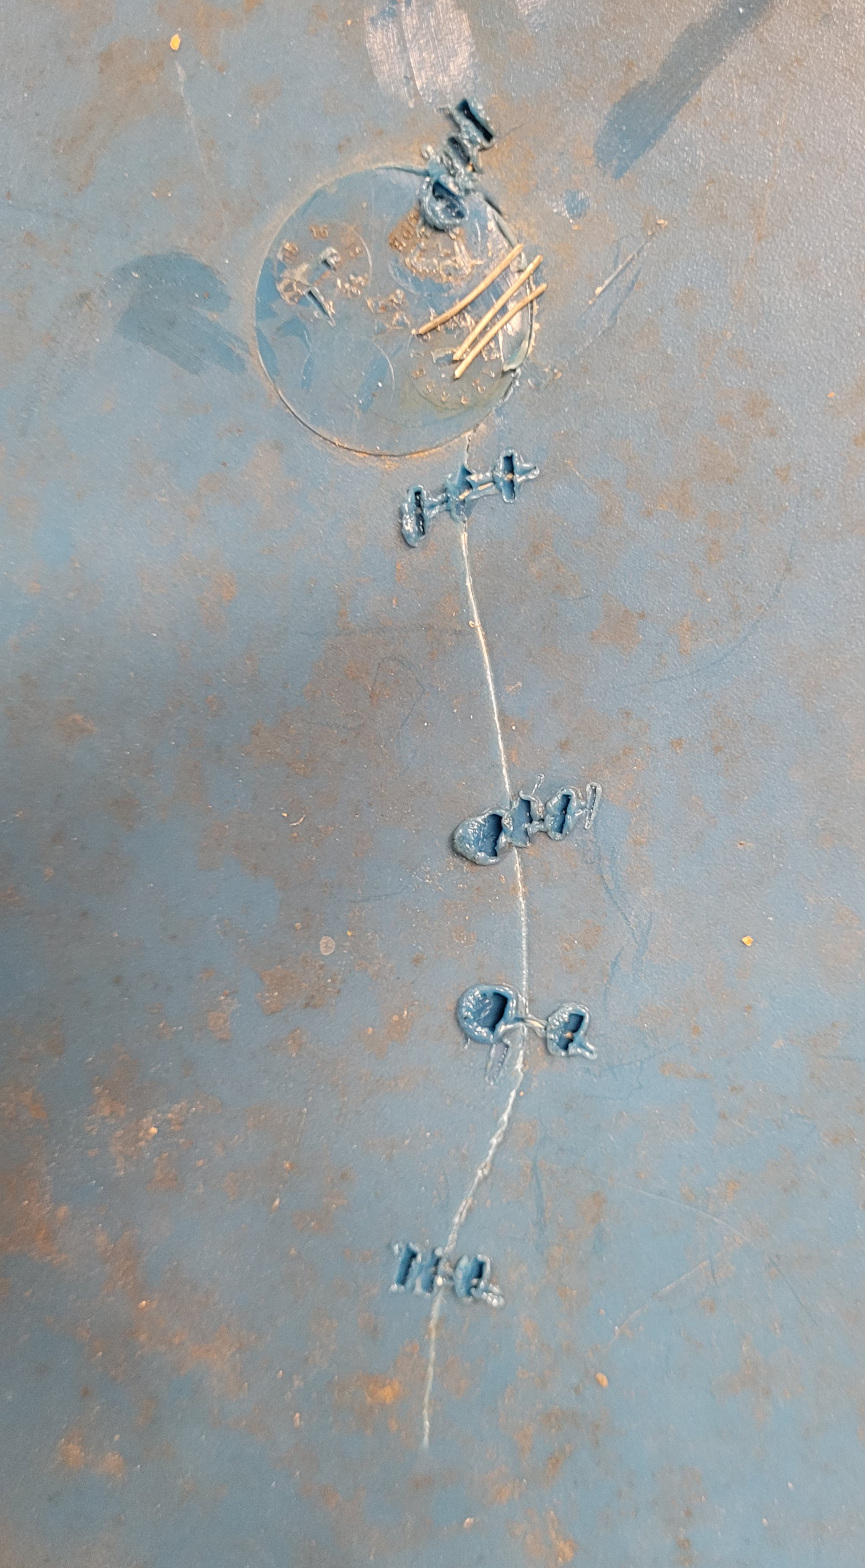 wires embedded into plastic to repair a crack